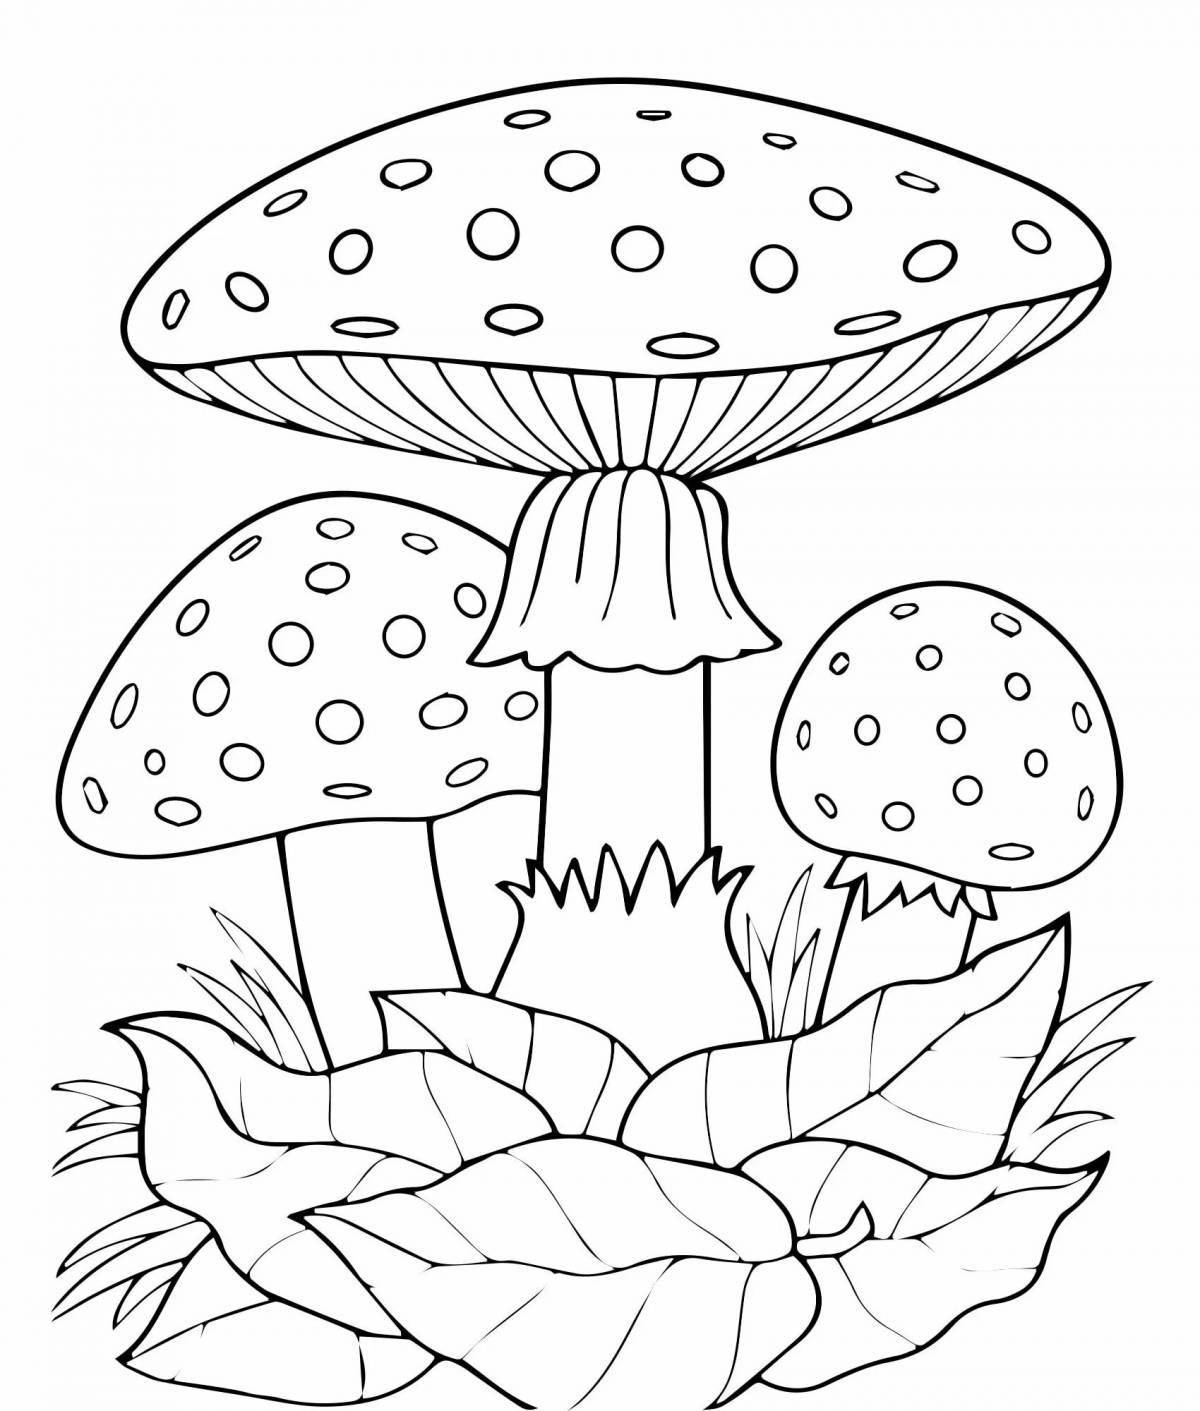 Colorful mushroom coloring pages for 4-5 year olds